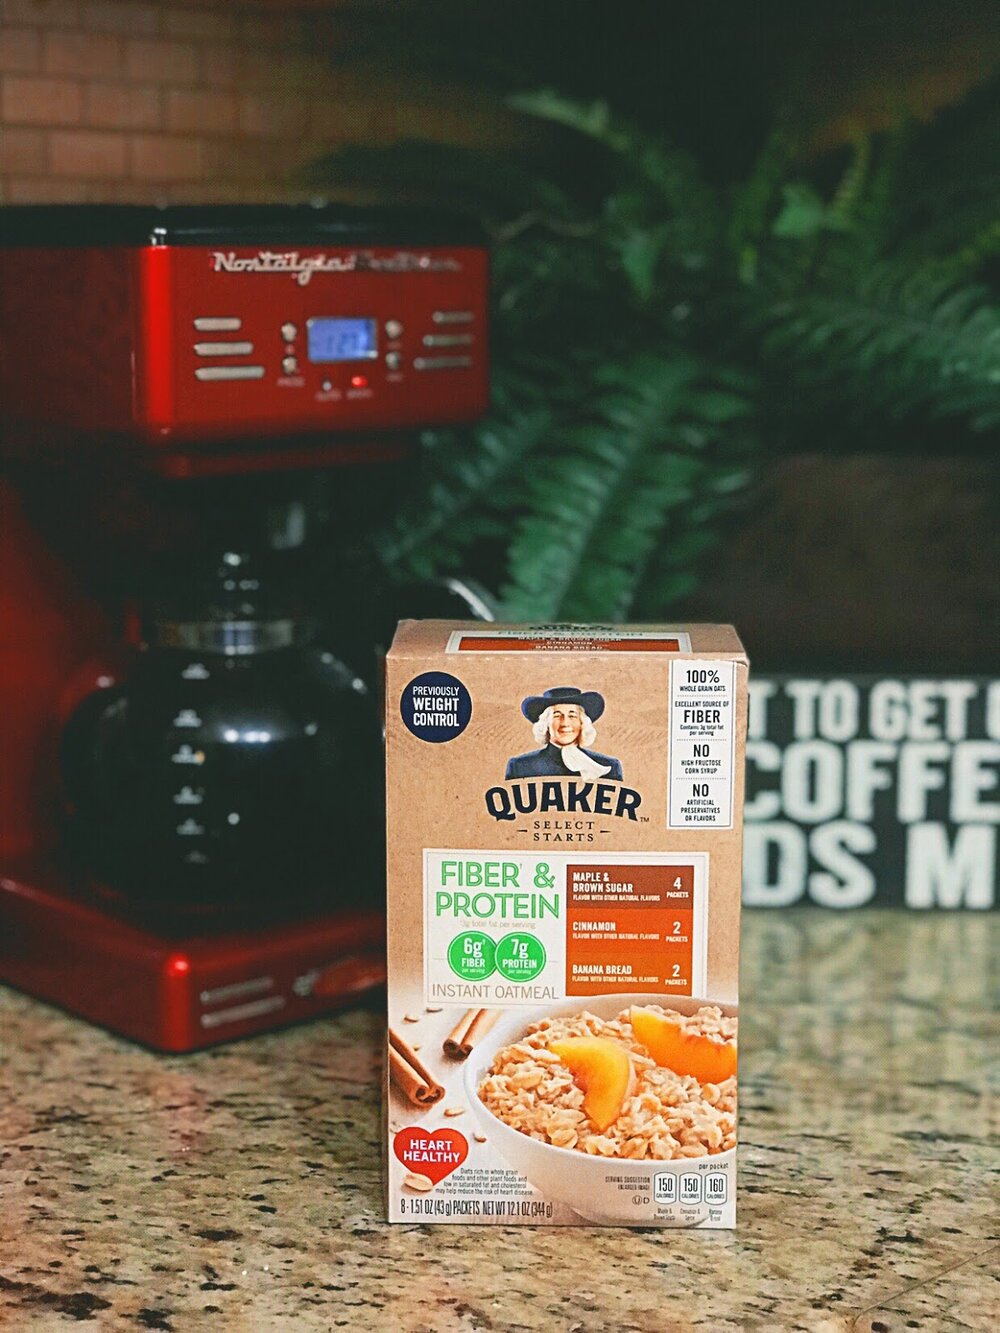 The Best Morning Oatmeal And Coffee!